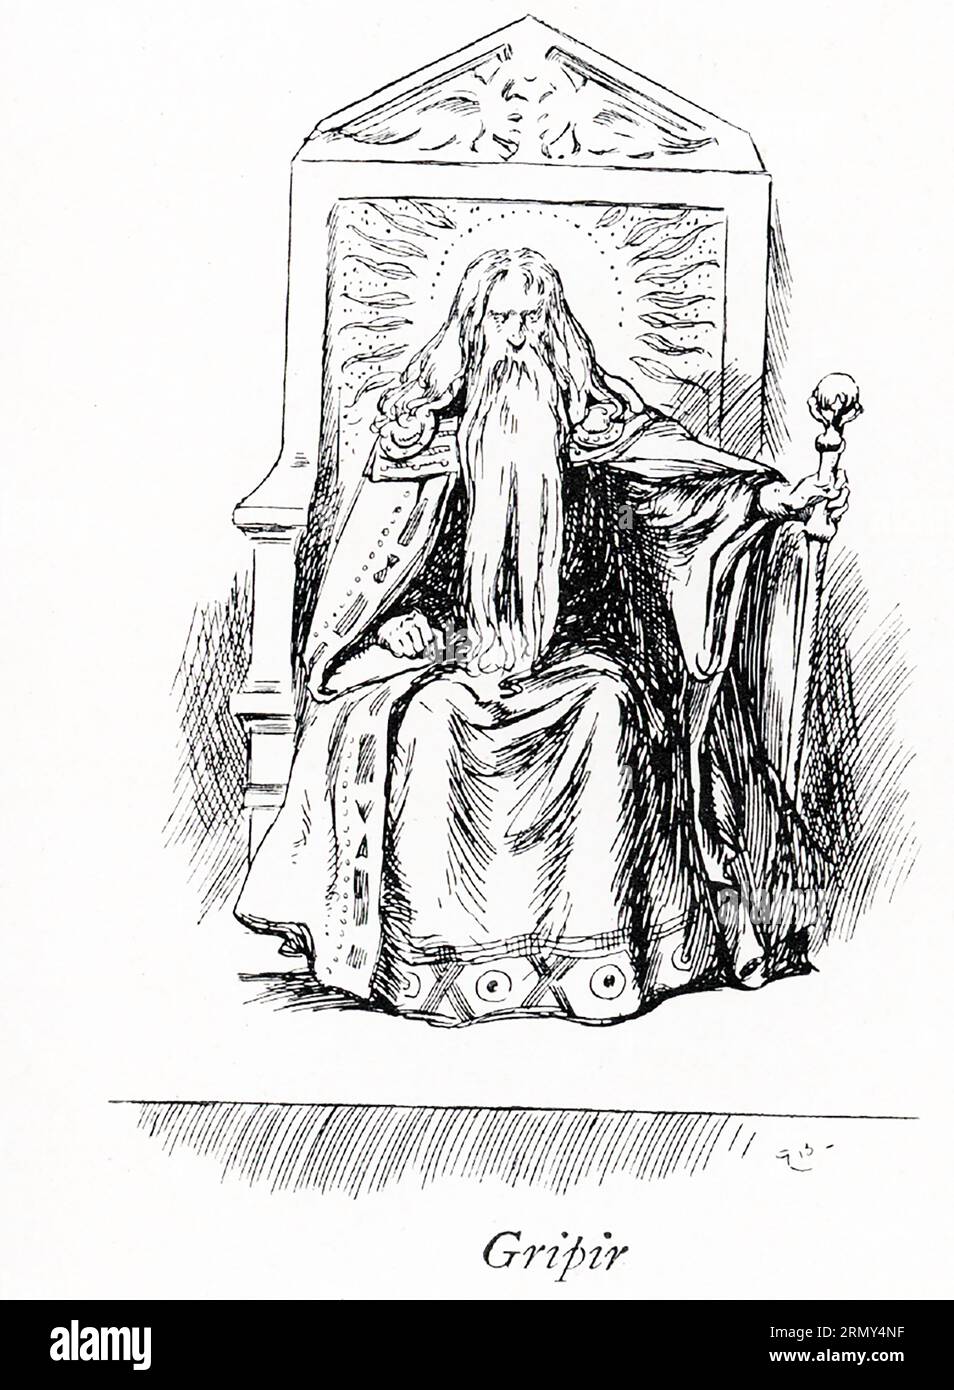 This early 1900s illustration shows Gripir.. Gripir was the son of King Eylimi, and the brother of Hjordis and maternal uncle of Siguror. He ruled over lands and was of all men wisest and prescient of the future. In the eddic poem Grípir's Prophecy,' a youthful Siguror arrives at his hall and is met by a man named Geitir. Stock Photo